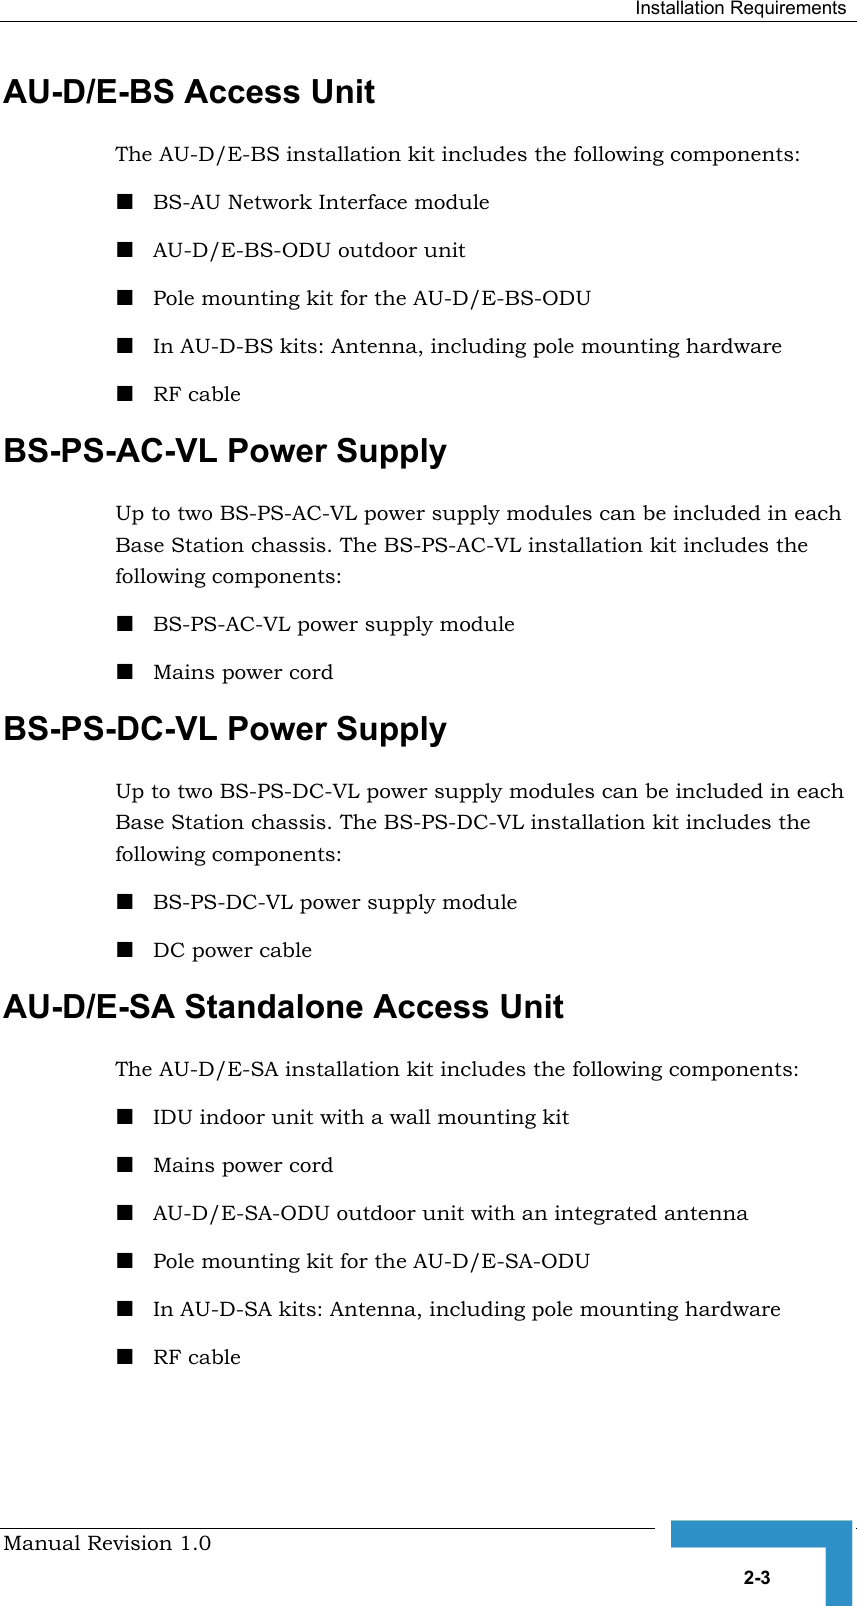  Installation Requirements Manual Revision 1.0   2-3 AU-D/E-BS Access Unit The AU-D/E-BS installation kit includes the following components: ! BS-AU Network Interface module  ! AU-D/E-BS-ODU outdoor unit  ! Pole mounting kit for the AU-D/E-BS-ODU ! In AU-D-BS kits: Antenna, including pole mounting hardware ! RF cable BS-PS-AC-VL Power Supply Up to two BS-PS-AC-VL power supply modules can be included in each Base Station chassis. The BS-PS-AC-VL installation kit includes the following components: ! BS-PS-AC-VL power supply module ! Mains power cord BS-PS-DC-VL Power Supply Up to two BS-PS-DC-VL power supply modules can be included in each Base Station chassis. The BS-PS-DC-VL installation kit includes the following components: ! BS-PS-DC-VL power supply module ! DC power cable AU-D/E-SA Standalone Access Unit  The AU-D/E-SA installation kit includes the following components: ! IDU indoor unit with a wall mounting kit ! Mains power cord ! AU-D/E-SA-ODU outdoor unit with an integrated antenna  ! Pole mounting kit for the AU-D/E-SA-ODU ! In AU-D-SA kits: Antenna, including pole mounting hardware ! RF cable 